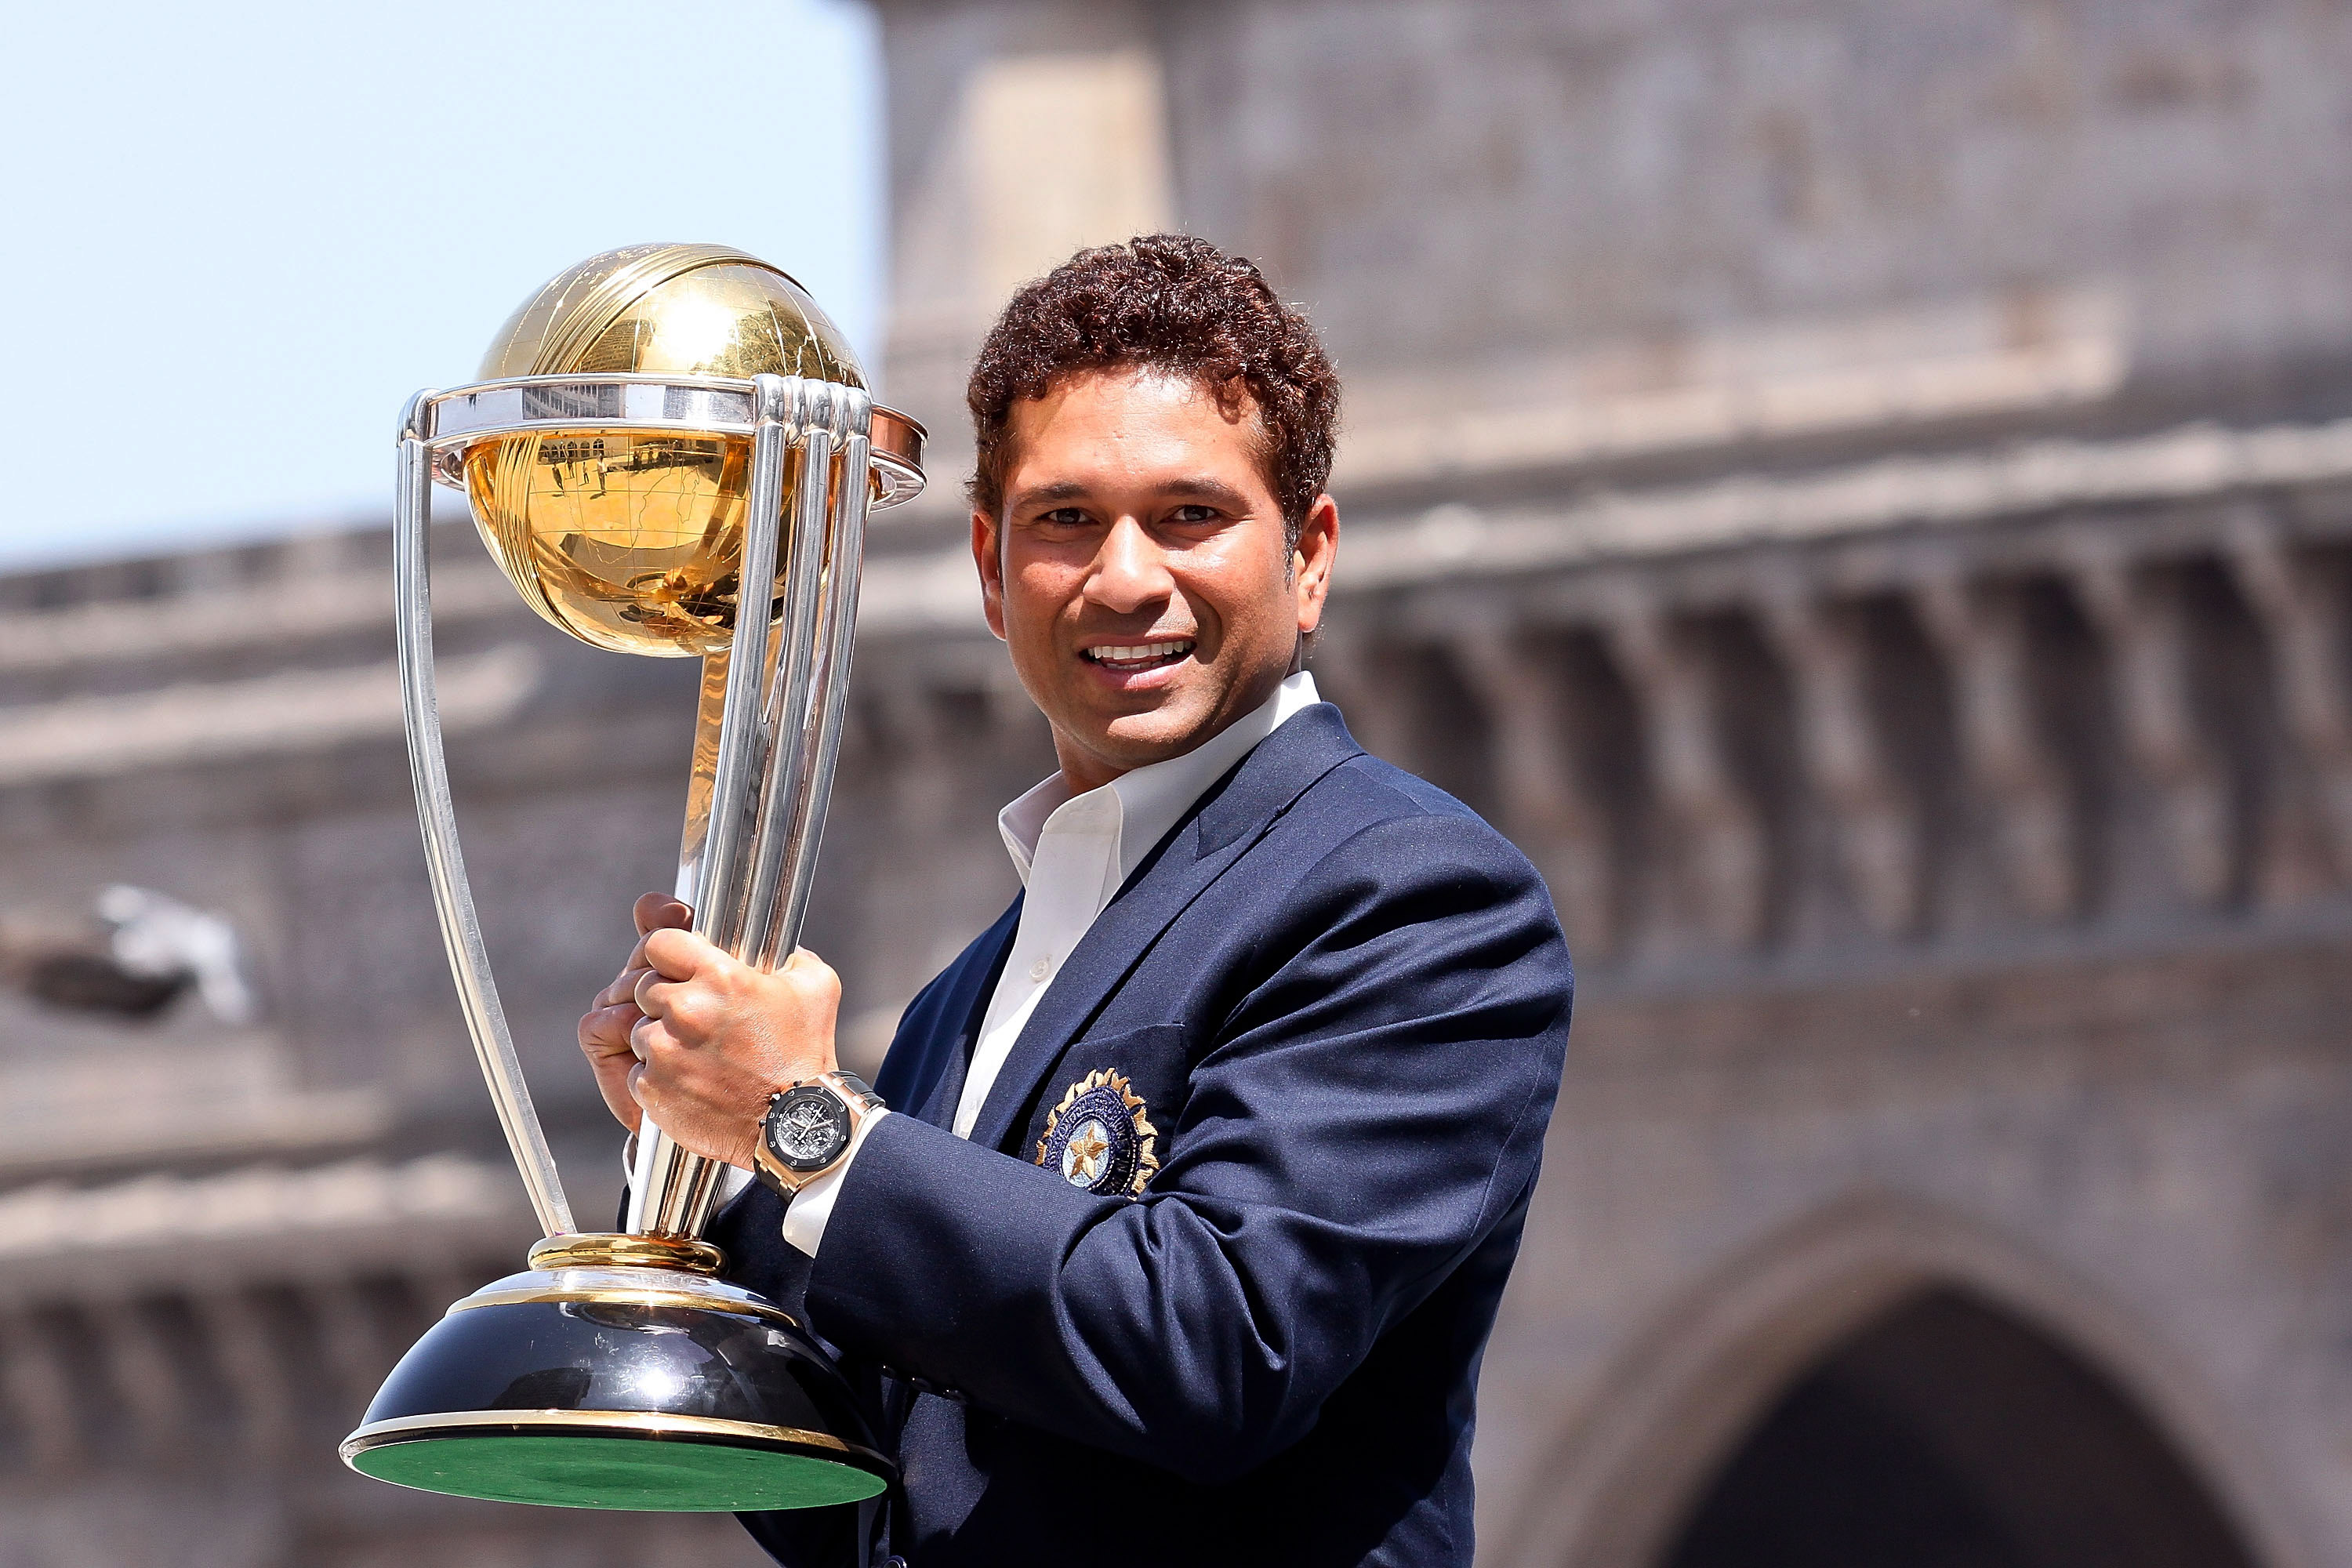 Cricket needs to be included in the Olympics, says Sachin Tendulkar